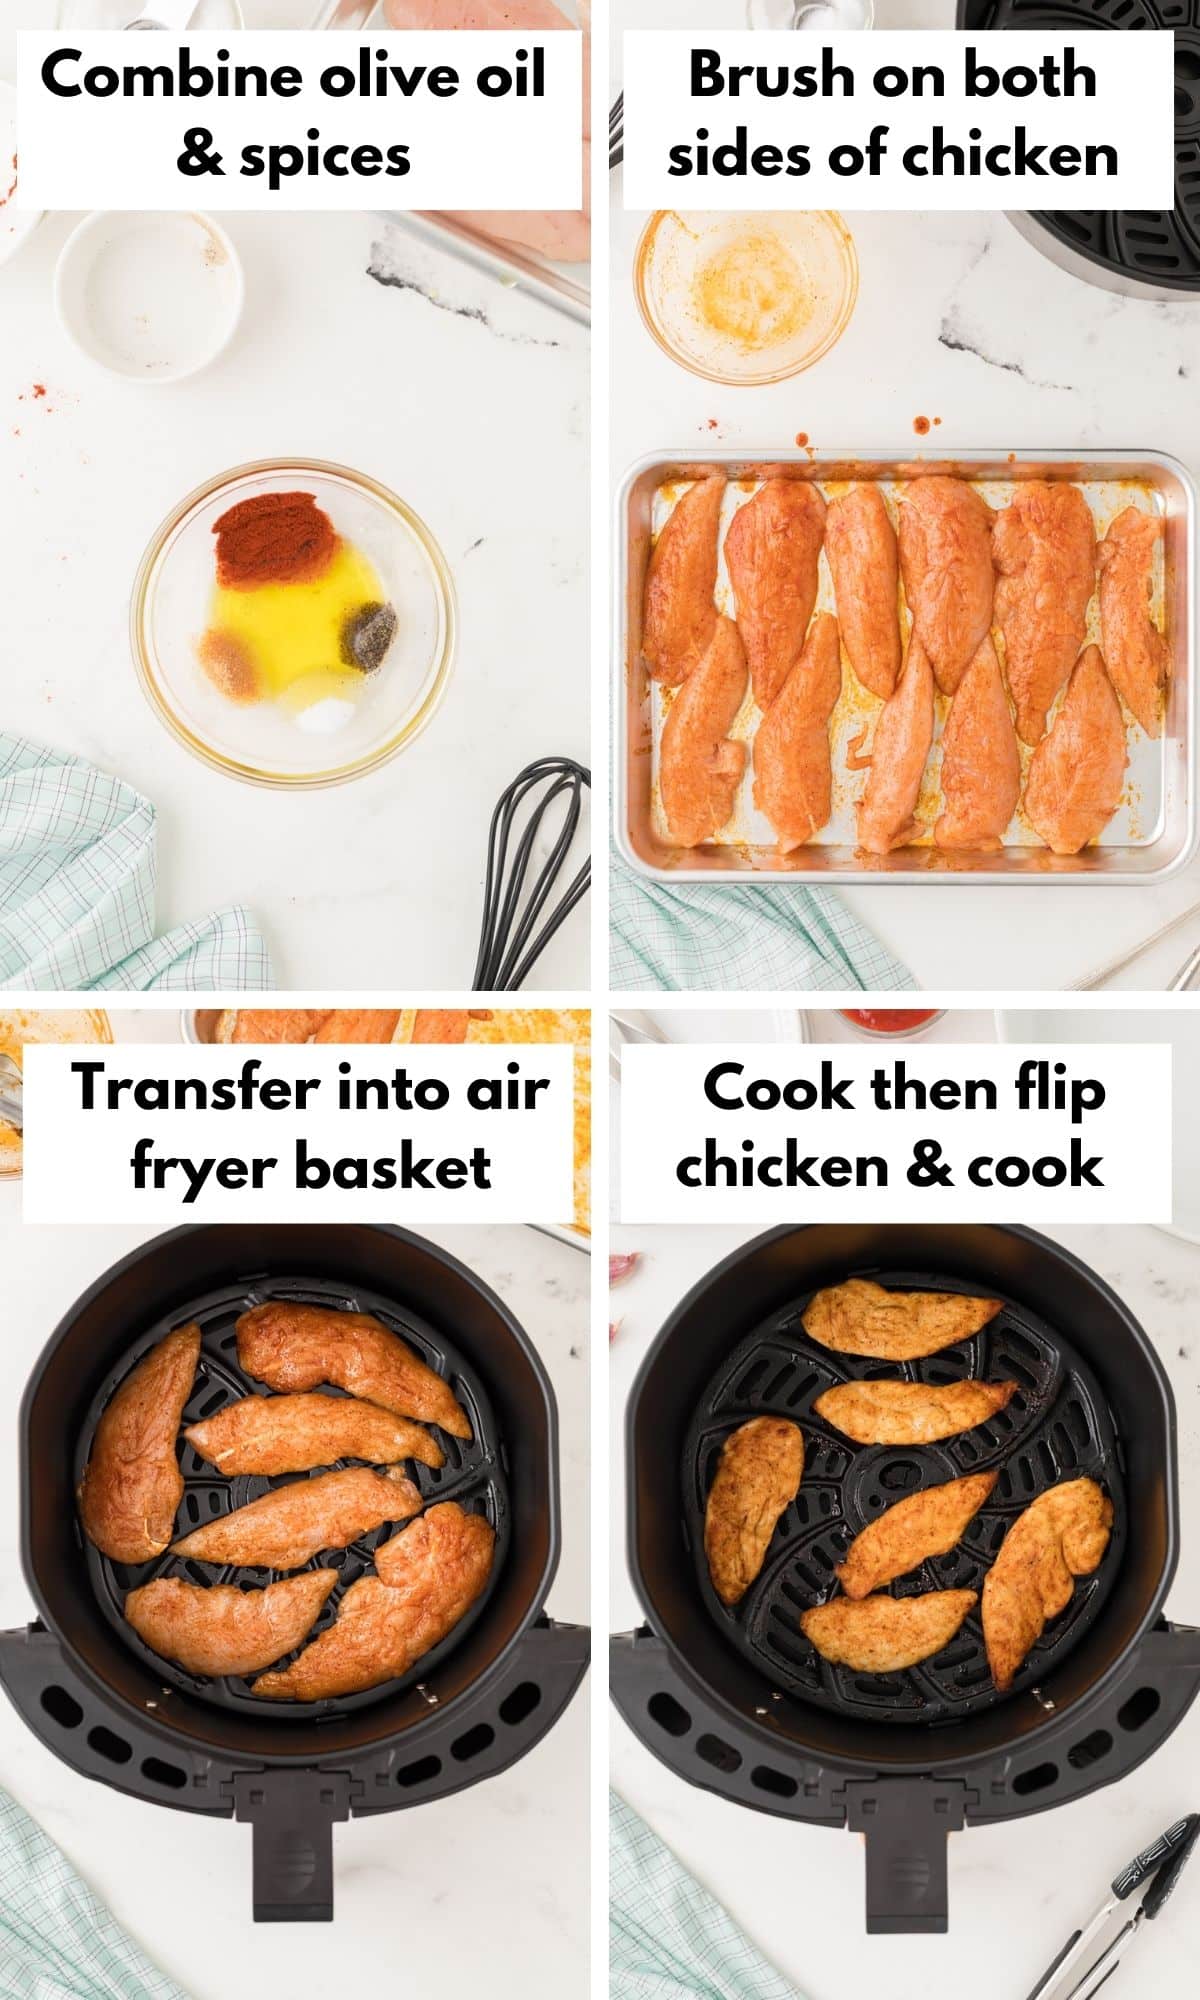 How to make chicken tenders in the air fryer